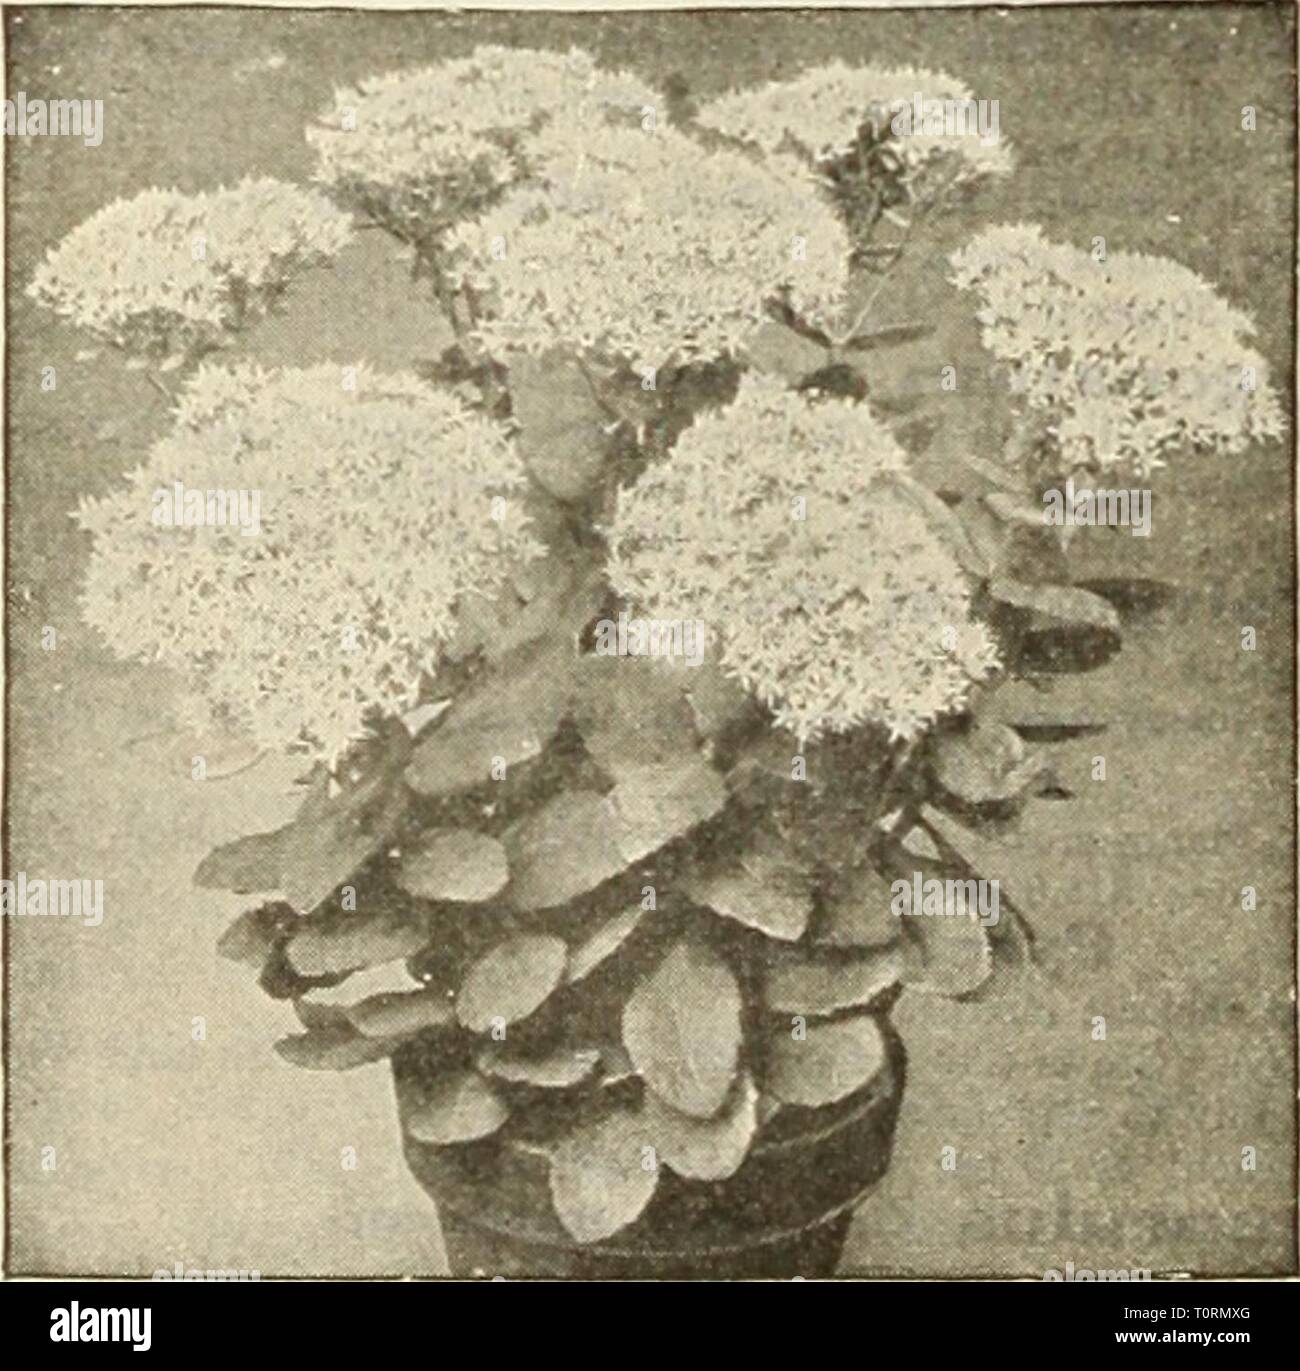 Dreer's autumn catalogue 1925 (1925) Dreer's autumn catalogue 1925  dreersautumncata1925henr Year: 1925  Rudbeckia Purpurea (Giant I'urplc Cone Flower)    Sedum Spectabile Silene (CatchHy) Alpestris. A good rock plant grows about 4 inches high with glistening white flowers in July and August. Sbafta {Autumn Calchfly). A charming rock plant, growing 4 to 6 inches high, with masses of bright pink flowers from July to October 25 cts. each; $2.50 per doz.; $15.00 per 100. Sedum (StoneCrop) Suitable for the rockery, carpet bedding, etc. Acre {Golden Moss). Foliage green; flowers bright yellow. Albu Stock Photo